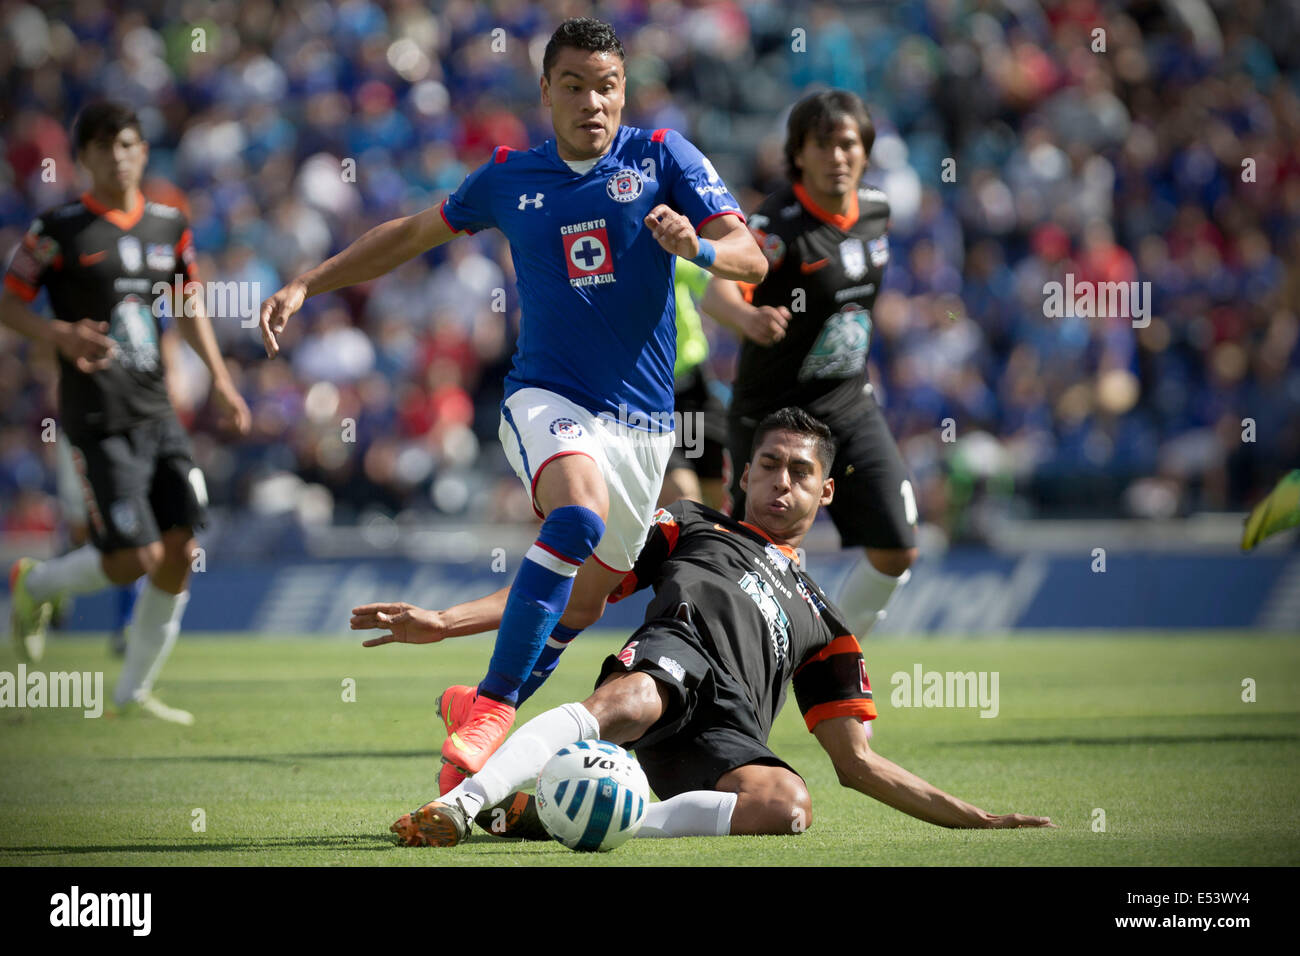 Mexico City, Mexico. 19th July, 2014. Cruz Azul's Pablo Barrera (front top) vies for the ball with Pachuca's Hugo Rodriguez during their match of the MX League Opening Tournament held at Azul Stadium in Mexico City, capital of Mexico, on July 19, 2014. Credit:  Alejandro Ayala/Xinhua/Alamy Live News Stock Photo